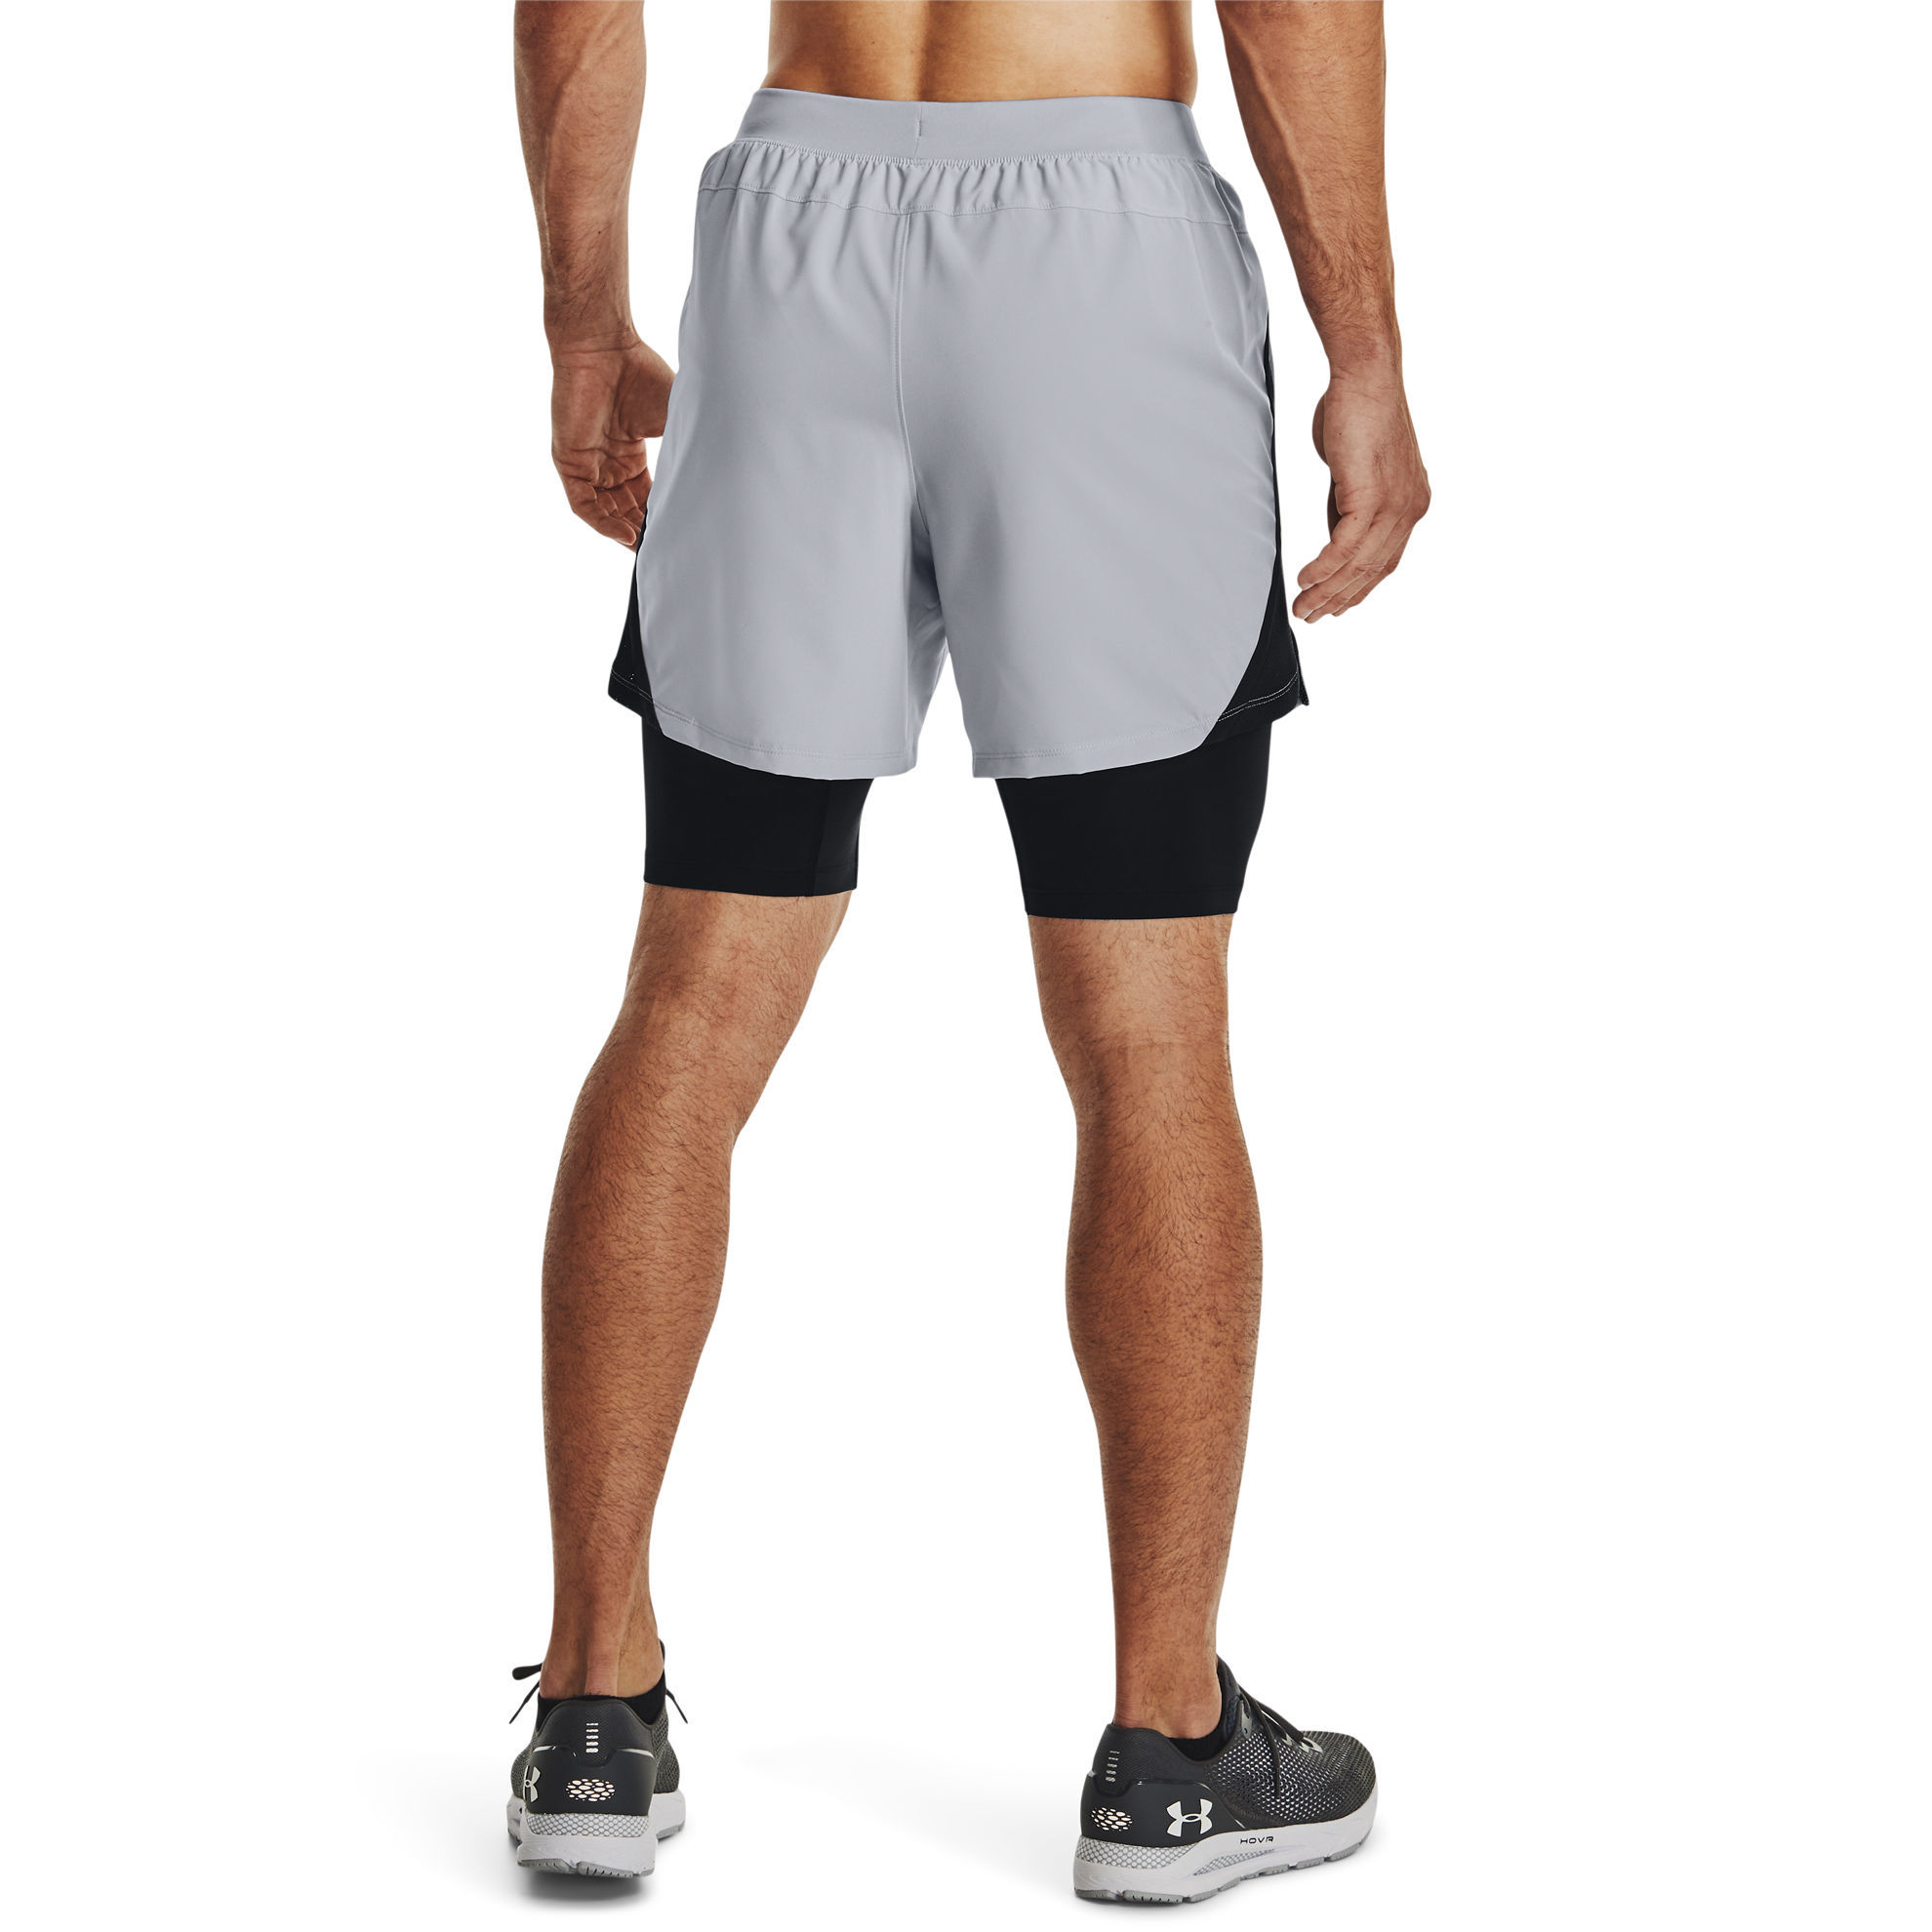 Under Armour Launch 2 in 1 Shorts Mod Gray - Löparshorts, Herr